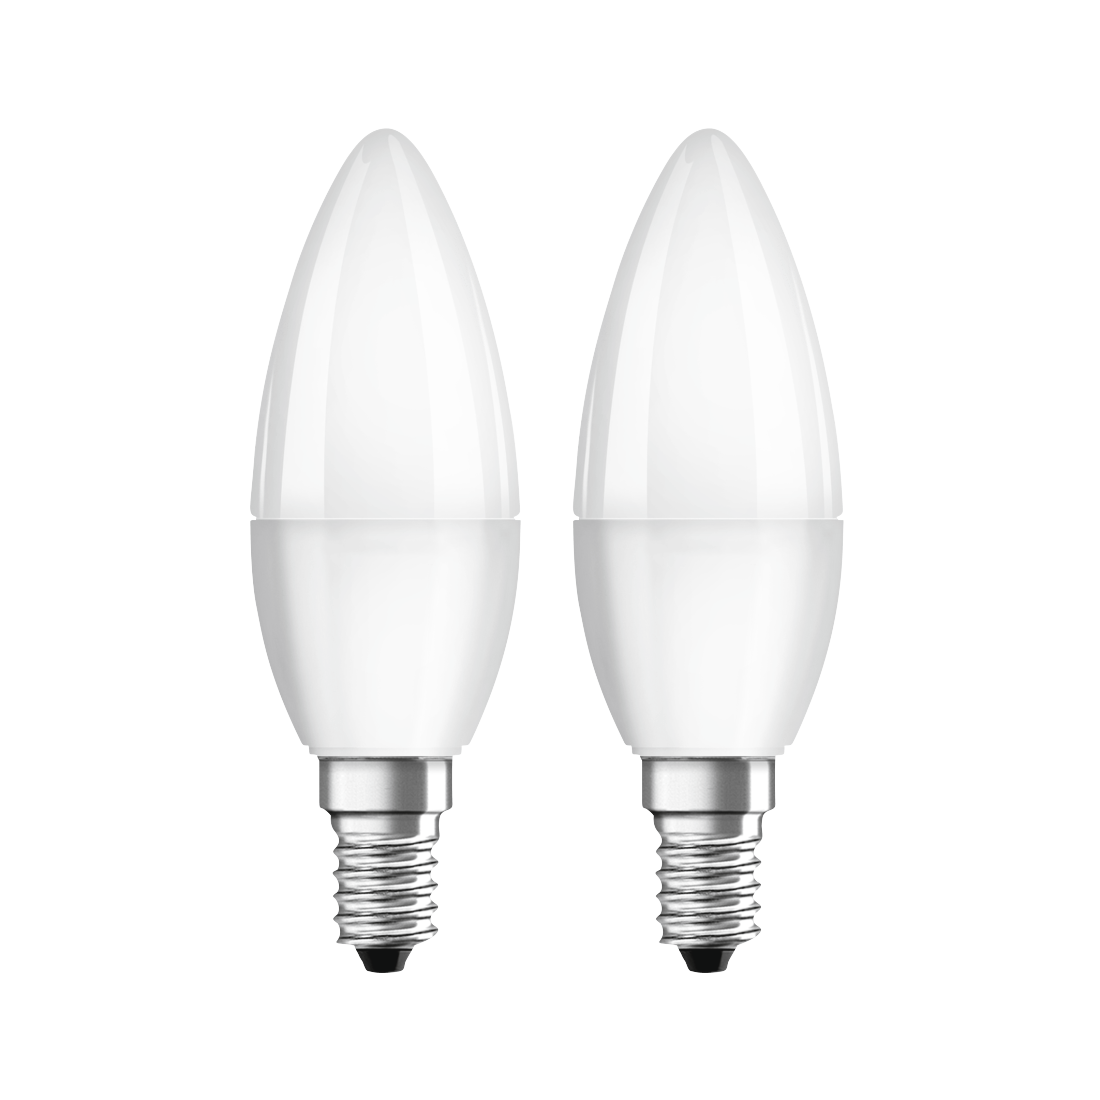 abx High-Res Image - Xavax, LED Bulb, E14, 470 lm Replaces 40 W, Candle Bulb, warm white, 2 Pcs